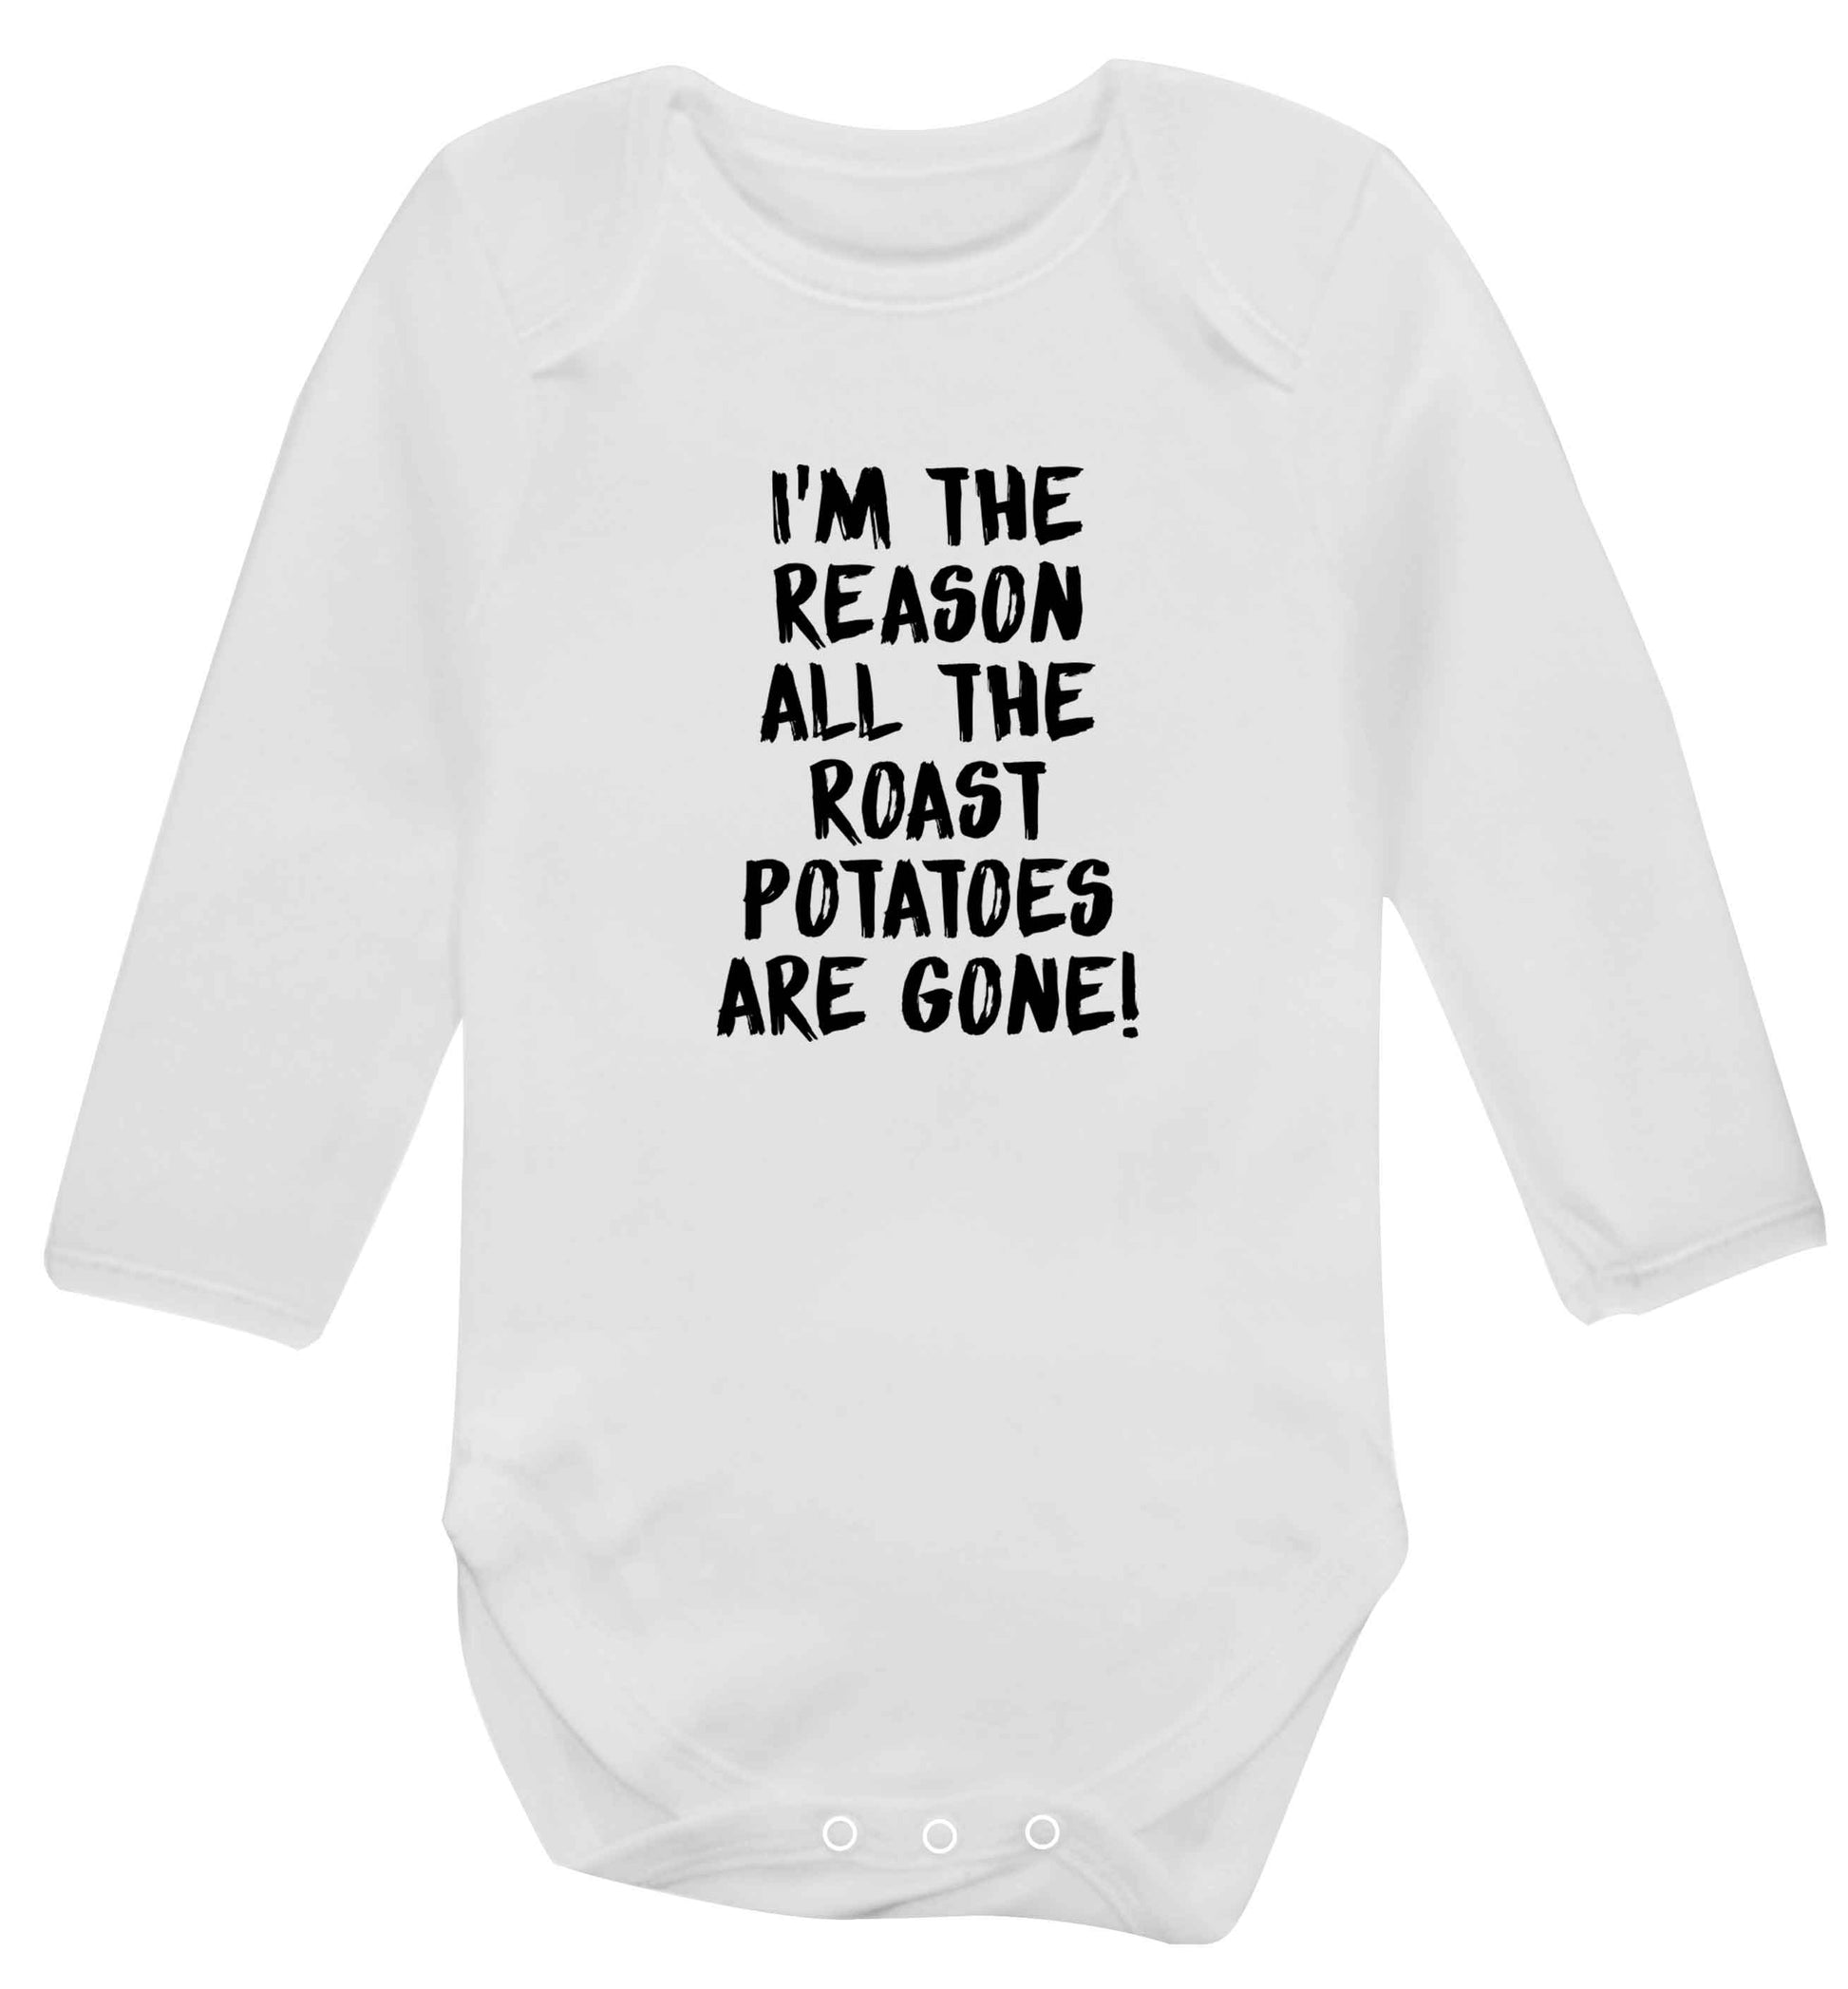 I'm the reason all the roast potatoes are gone baby vest long sleeved white 6-12 months